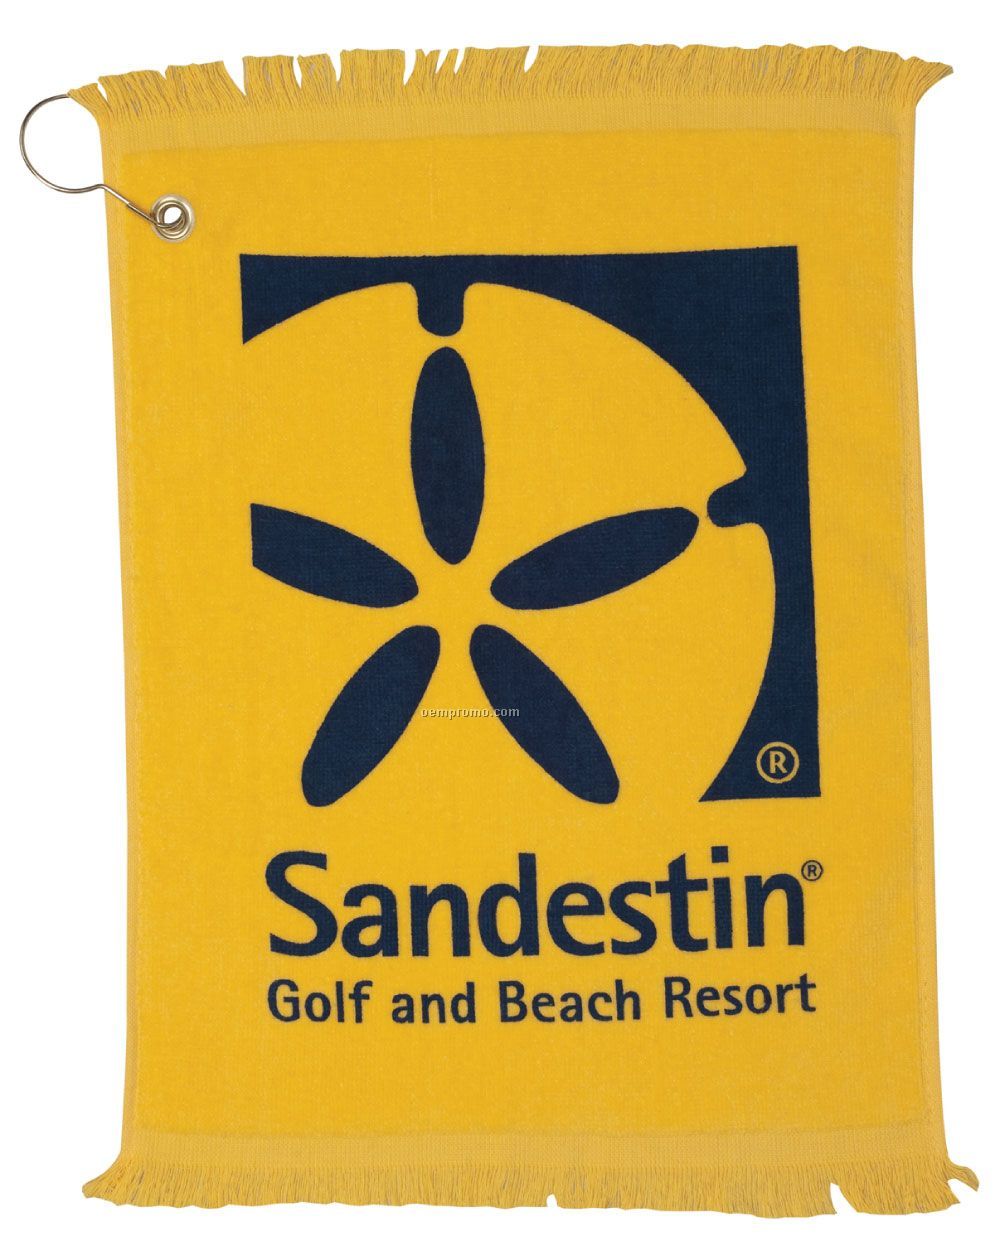 Jewel Collection Golf Towel - Printed 3 Day Proship